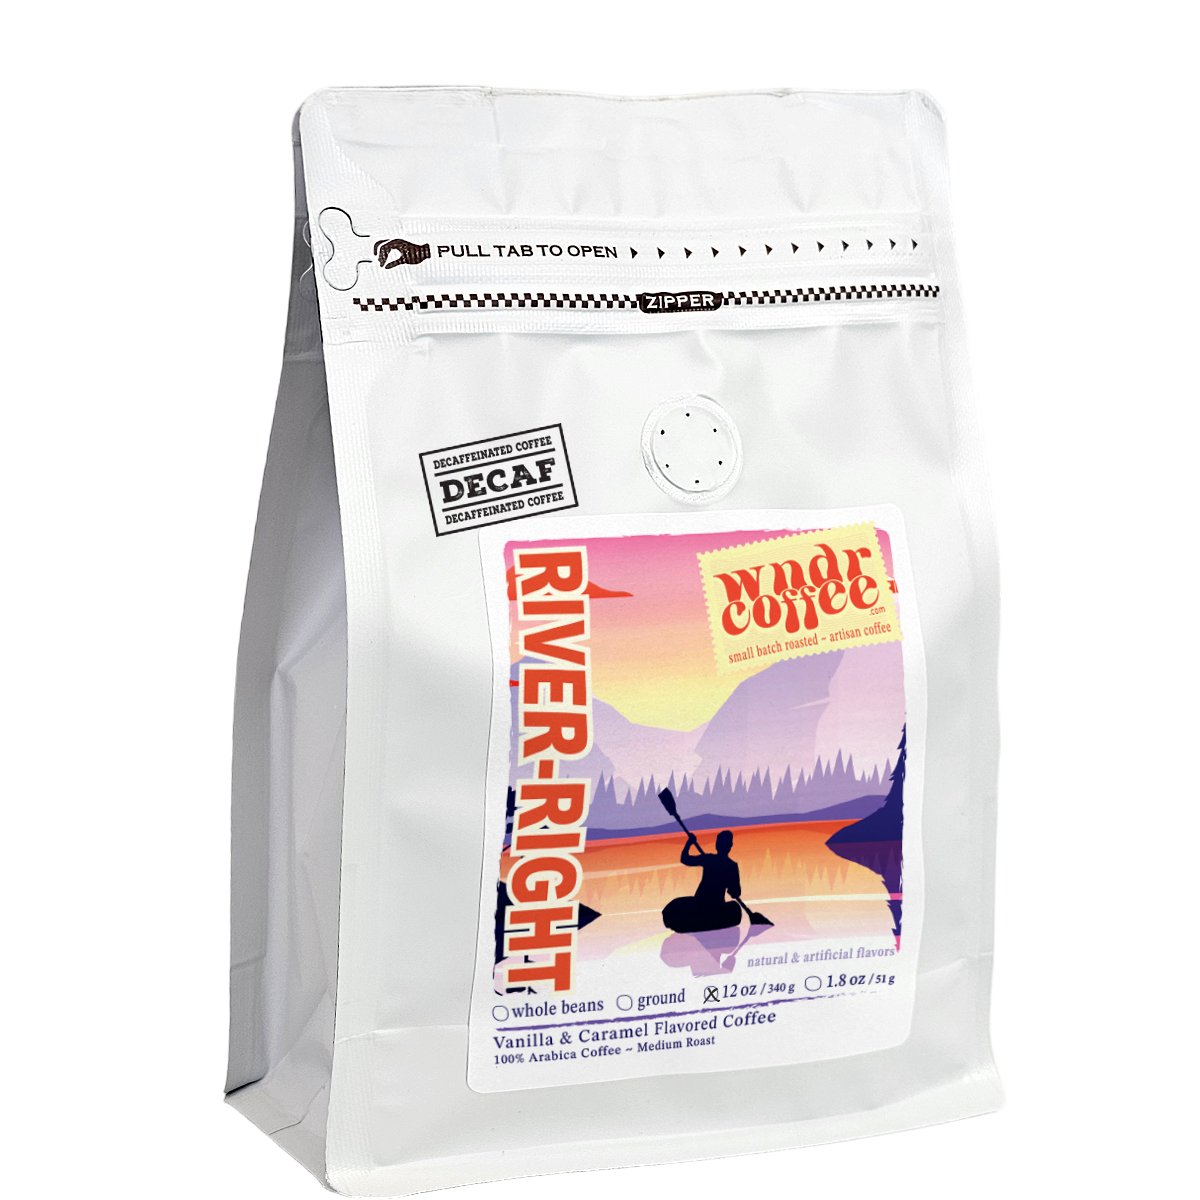 DECAF-12oz-bag-River-Right-Flavored-Coffee